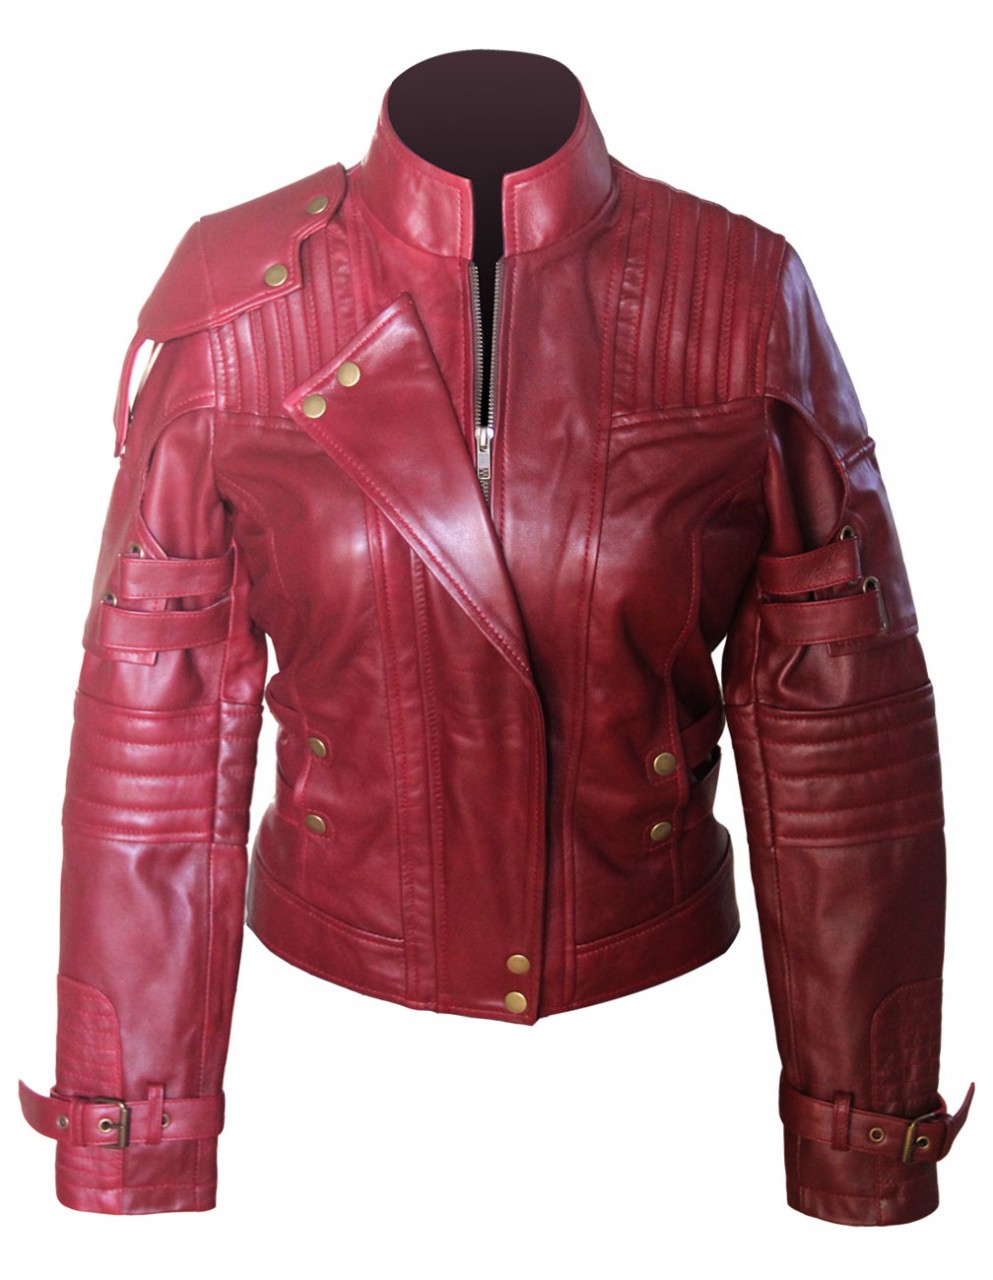 Guardians of the Galaxy Volume 2 Star Lord Jacket for Women